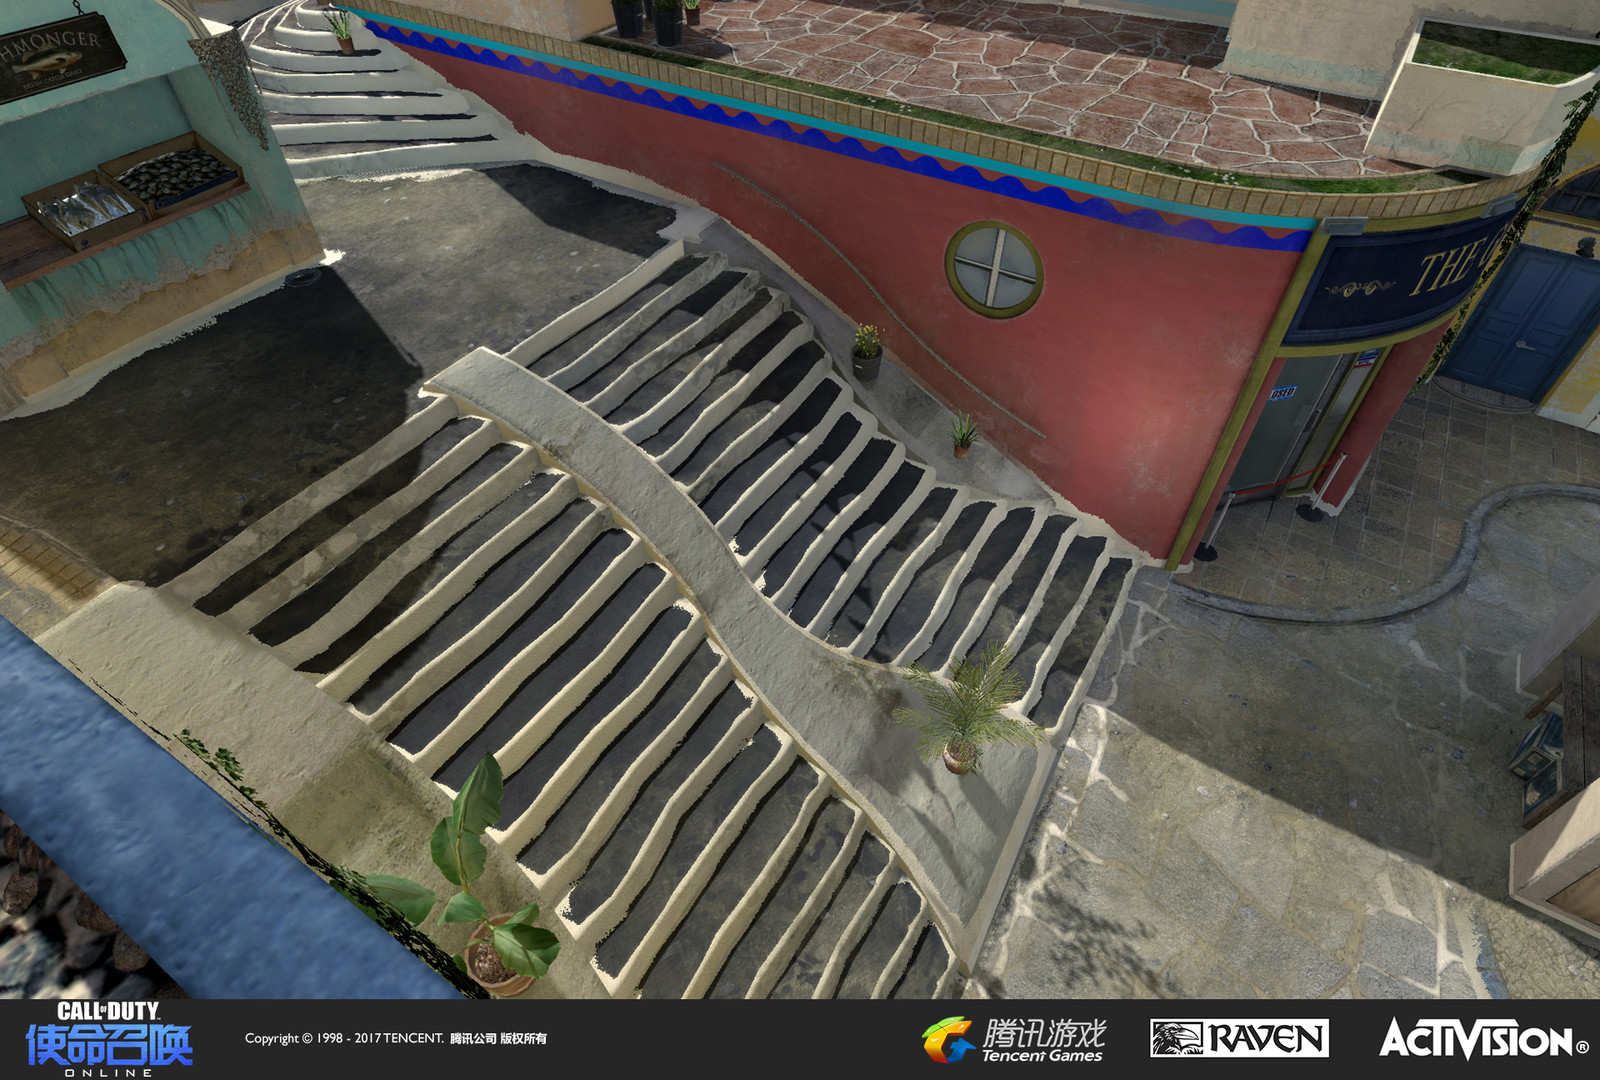 I created the stairway geo within the game engine and applied newly created plaster material treatments based on stairways in Santorini, Greece. The market stall atop the stairs was created by Raquel Garcia.